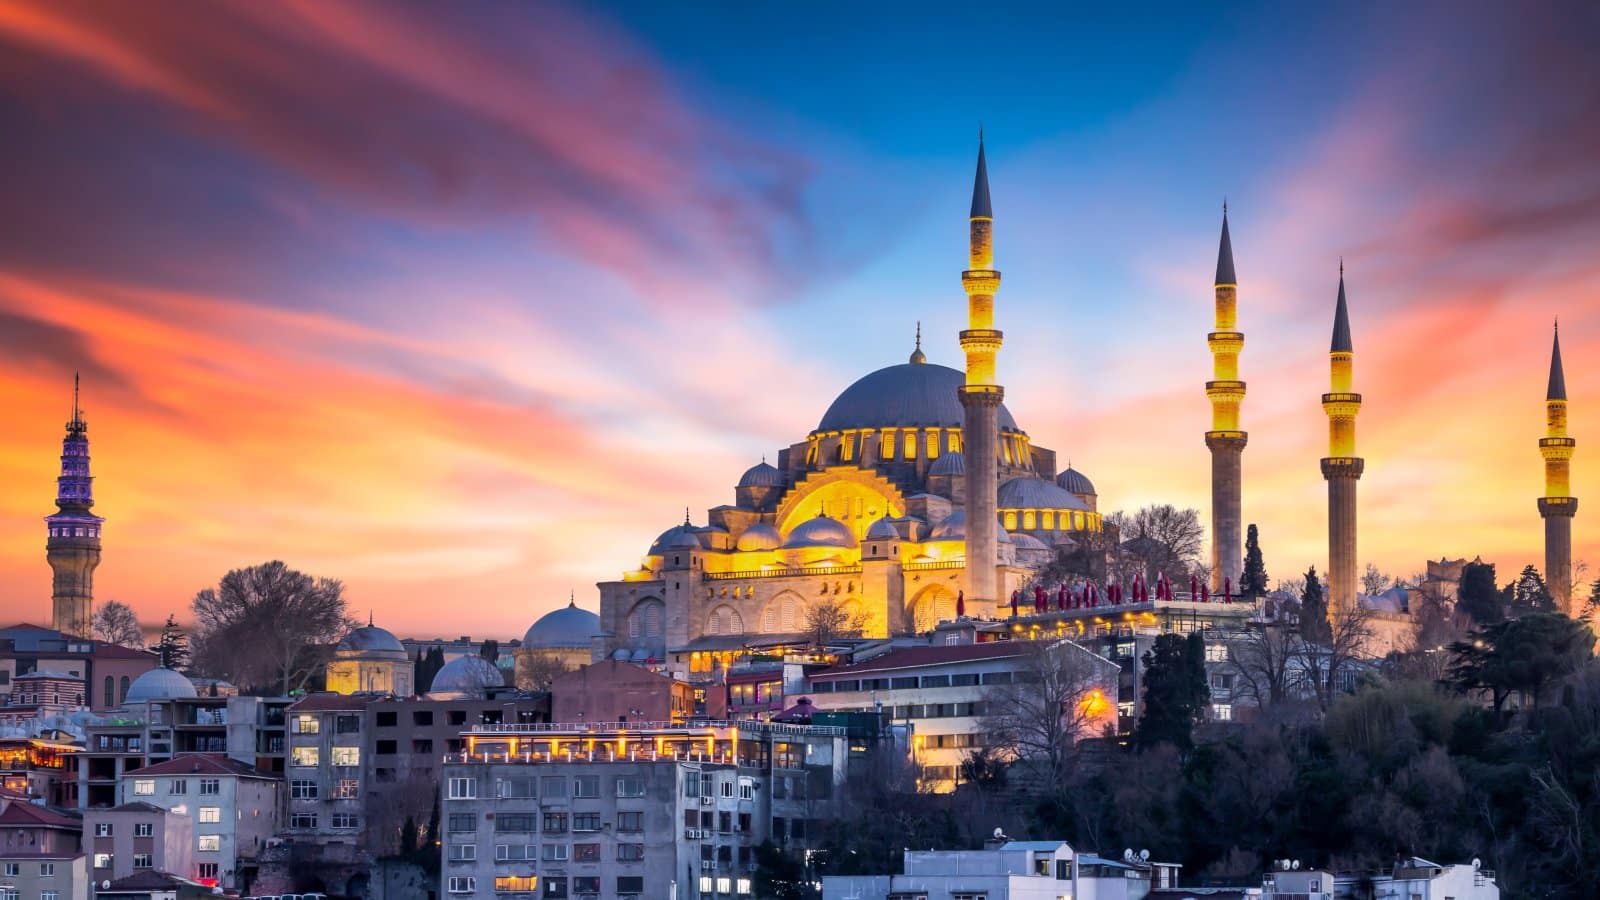 <p class="wp-caption-text">Image Credit: Shutterstock / Avigator Fortuner</p>  <p>A city that straddles two continents, Istanbul is a mesmerizing blend of East and West, ancient and modern.</p>